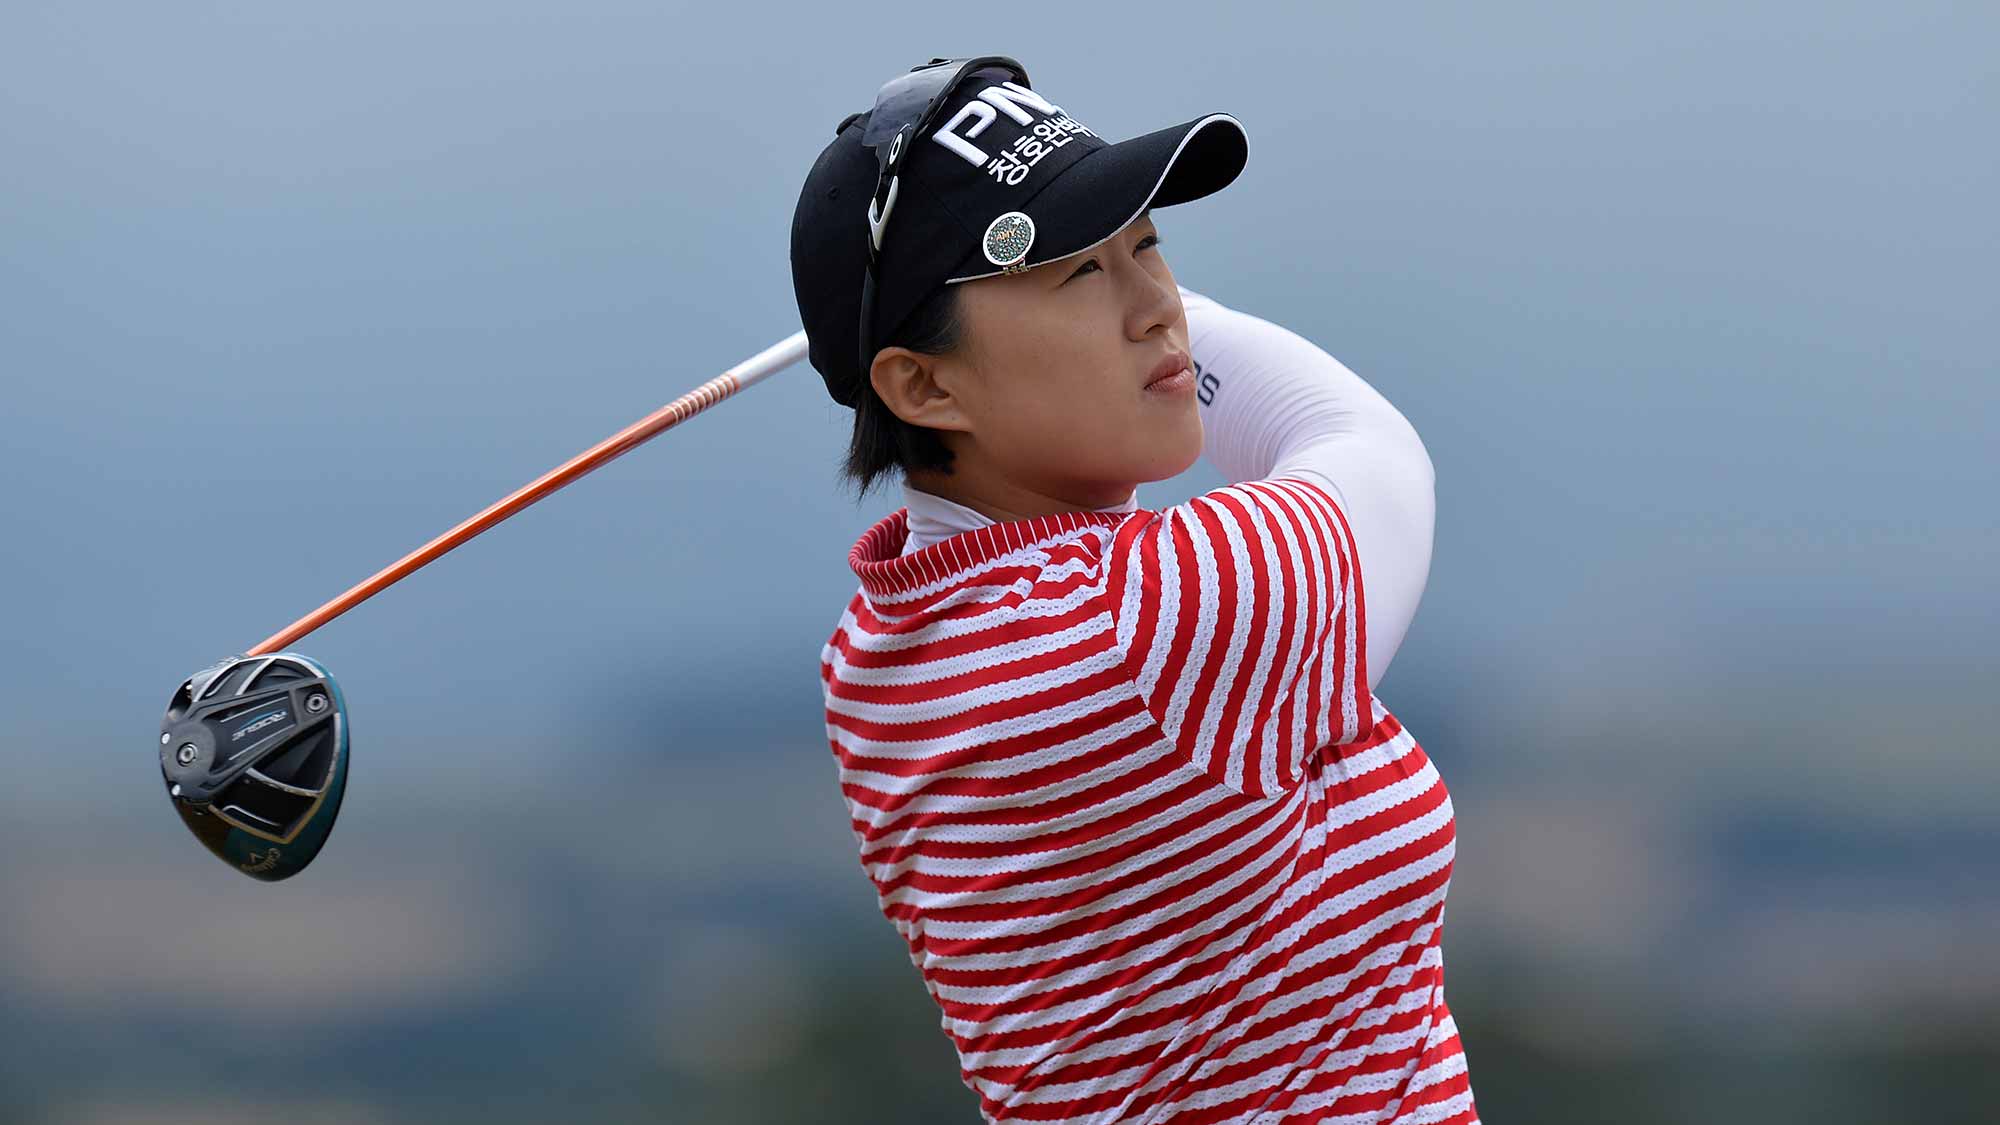 Amy Yang of Korea plays her tee shot at the 1st hole during the third day of the Aberdeen Ladies Scottish Open at Gullane Golf Course on July 28, 2018 in Gullane, Scotland